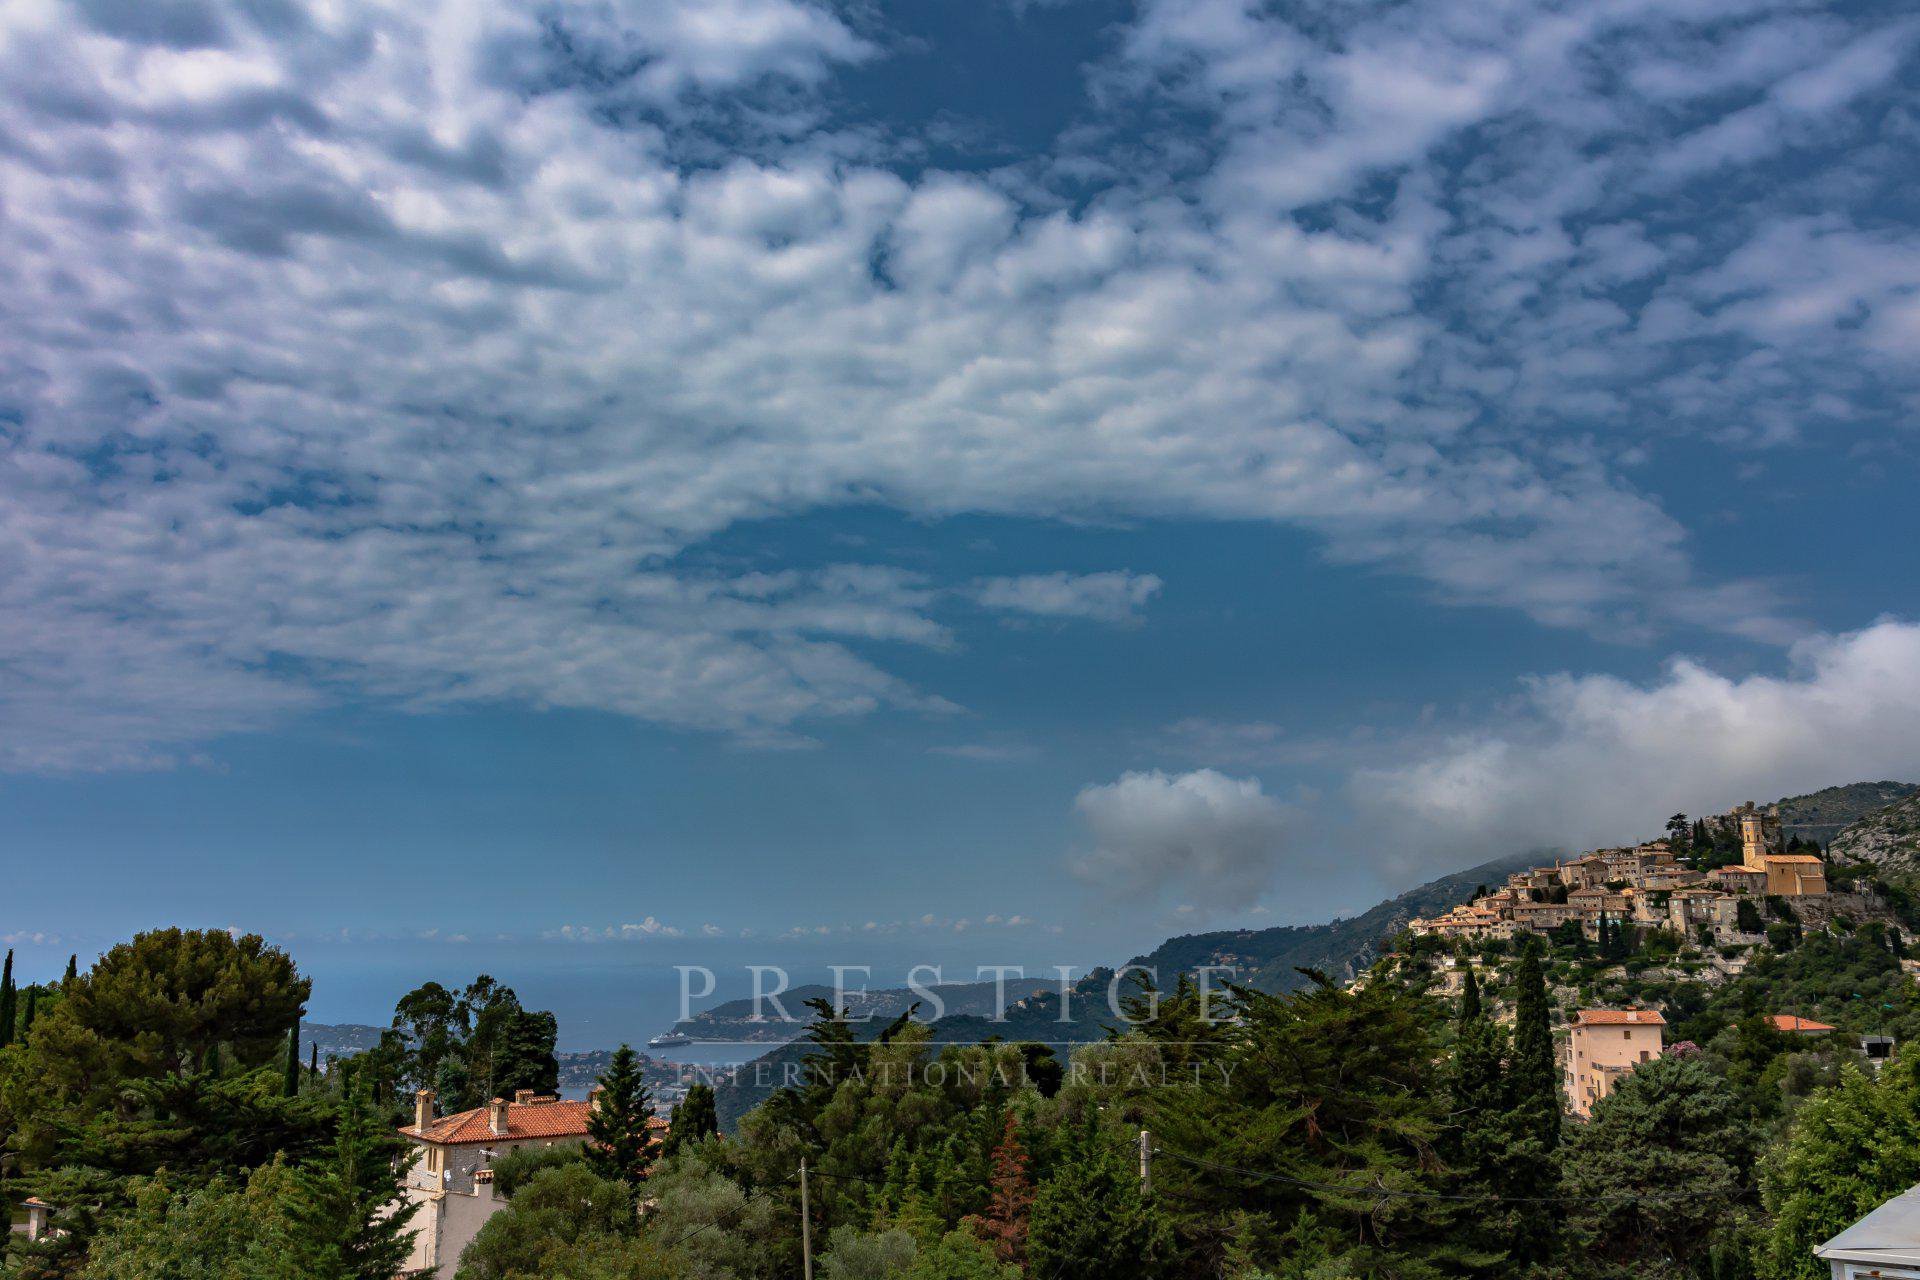 Eze, 1 bedroom flat sea view with roof terrace, cellar & parking